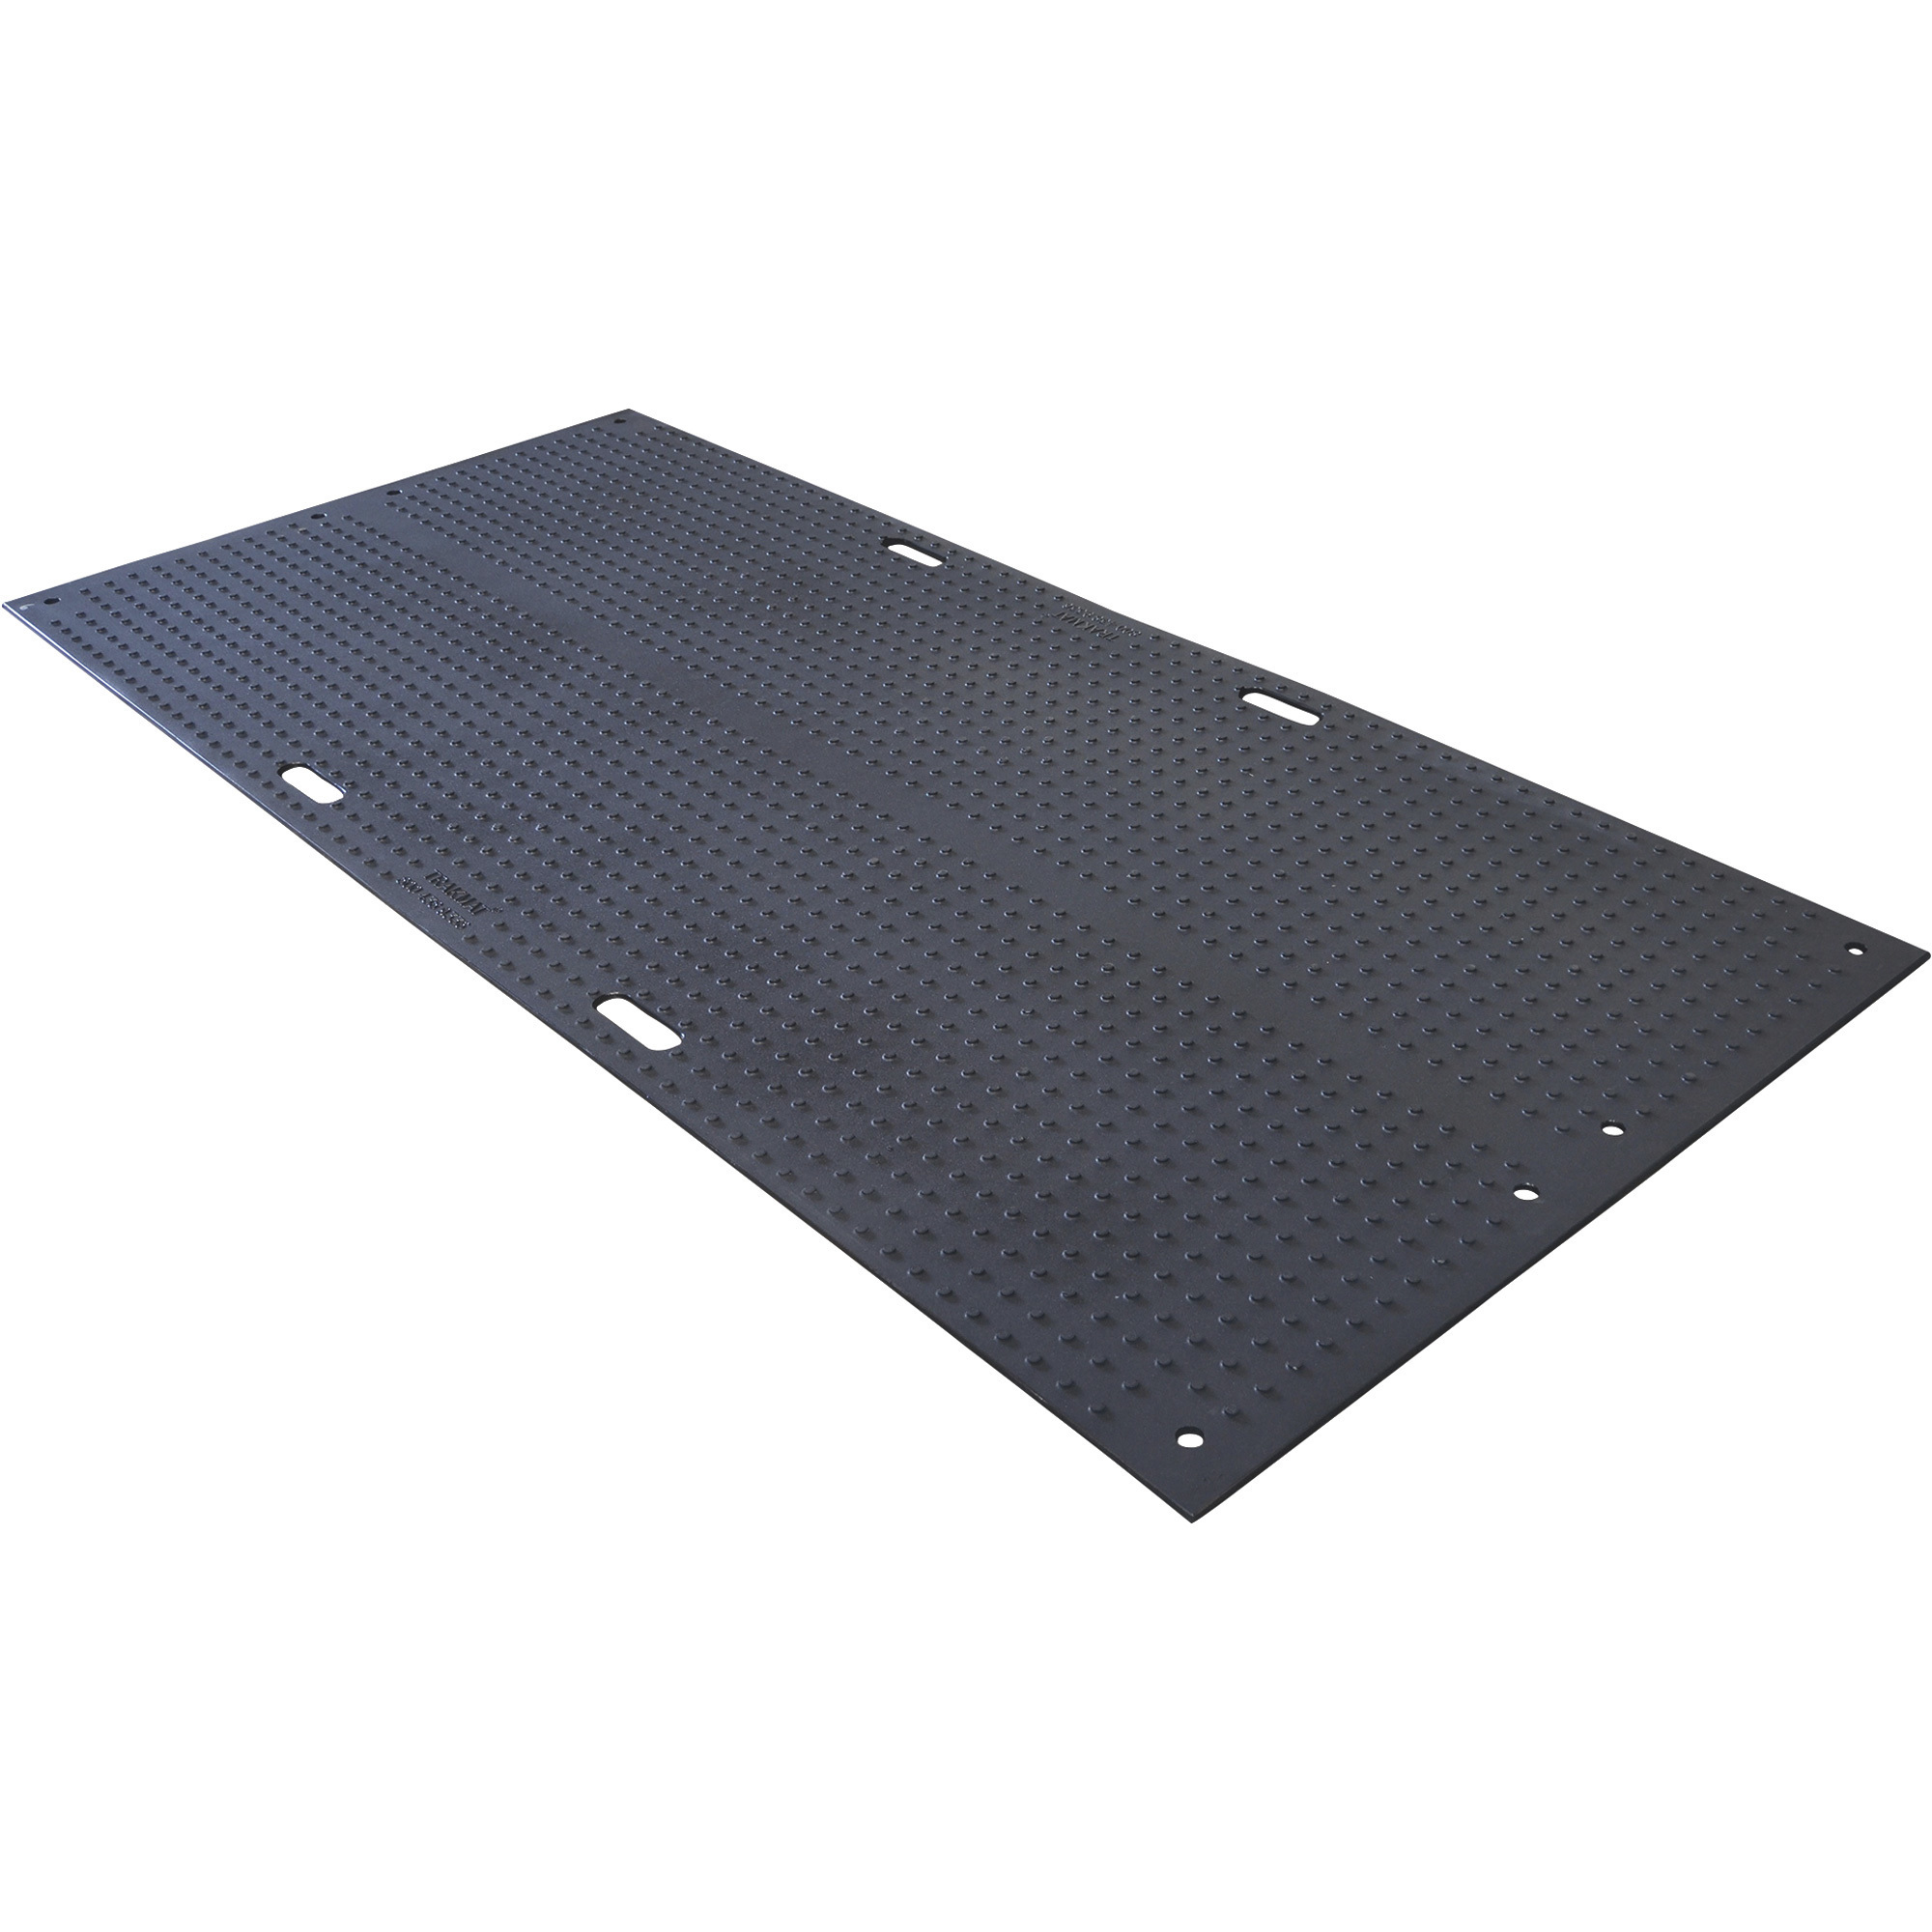 Checkers TrakMat Ground Protection Mat â Black, 3ft.W x 8ft.L, Power Cylinder Tread Design